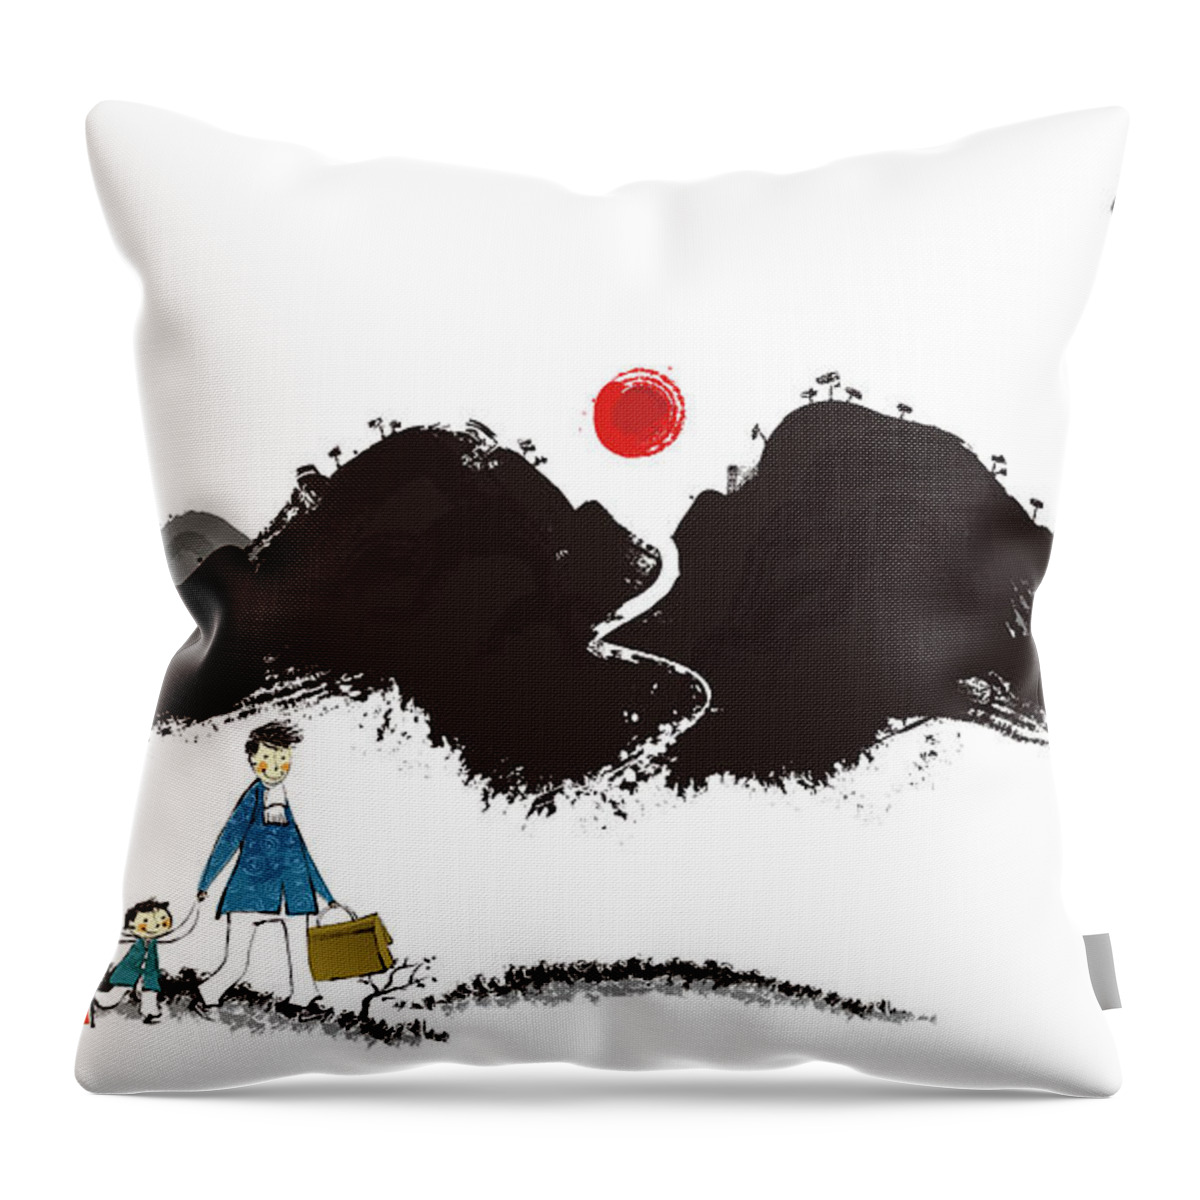 Tranquility Throw Pillow featuring the digital art Family On Journey by Eastnine Inc.